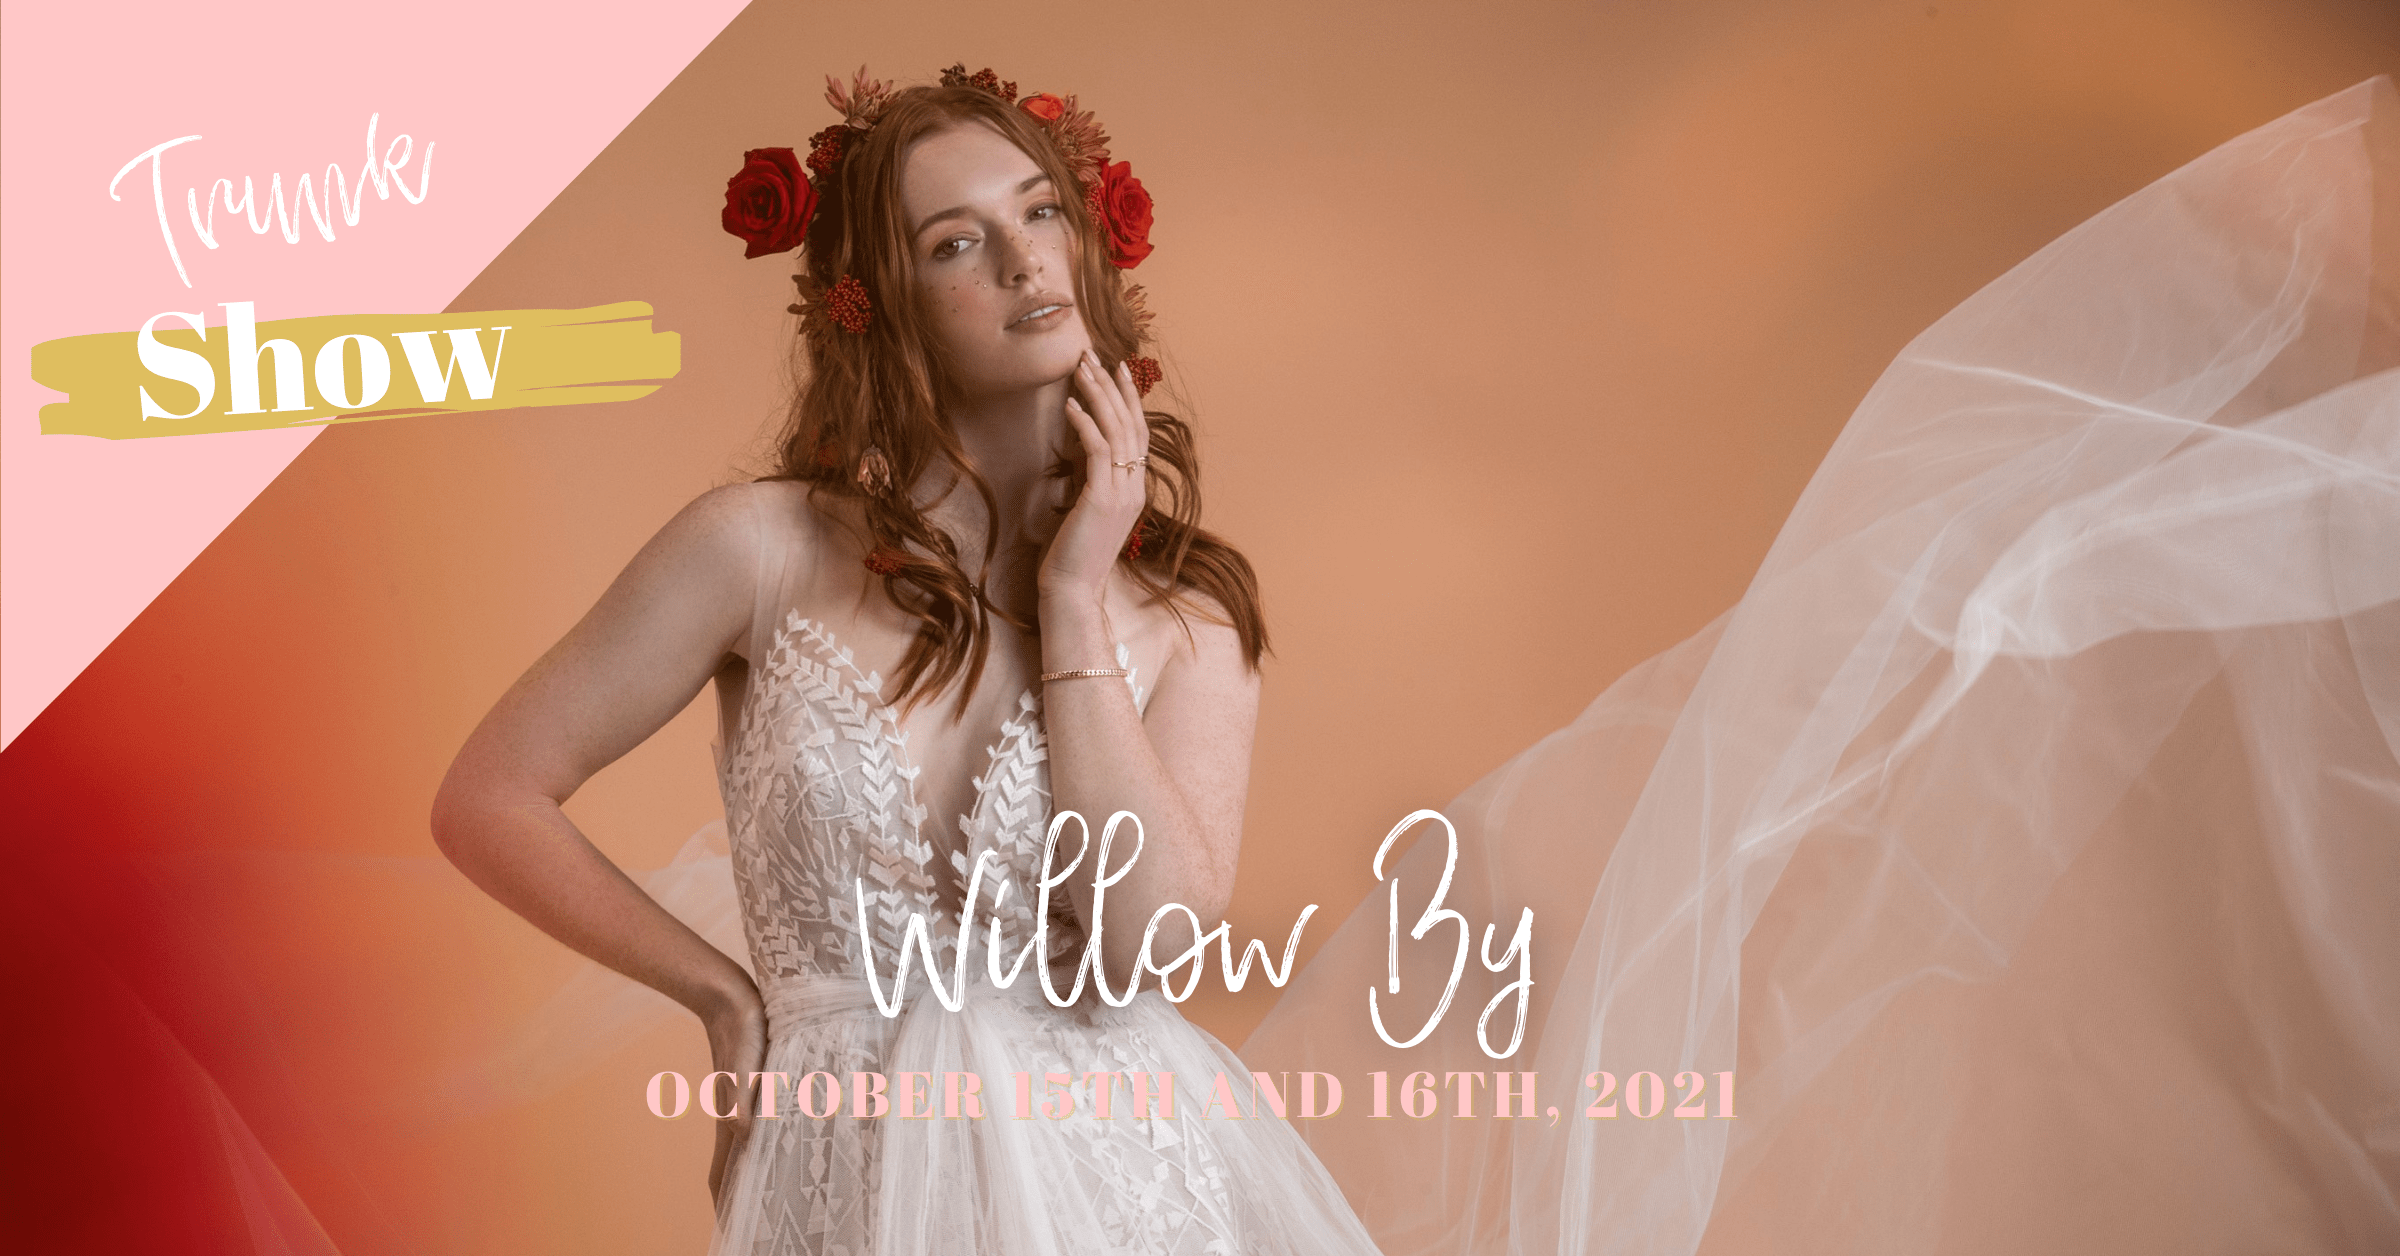 Willow By October 15th and 16th, 2021 (By Watters)